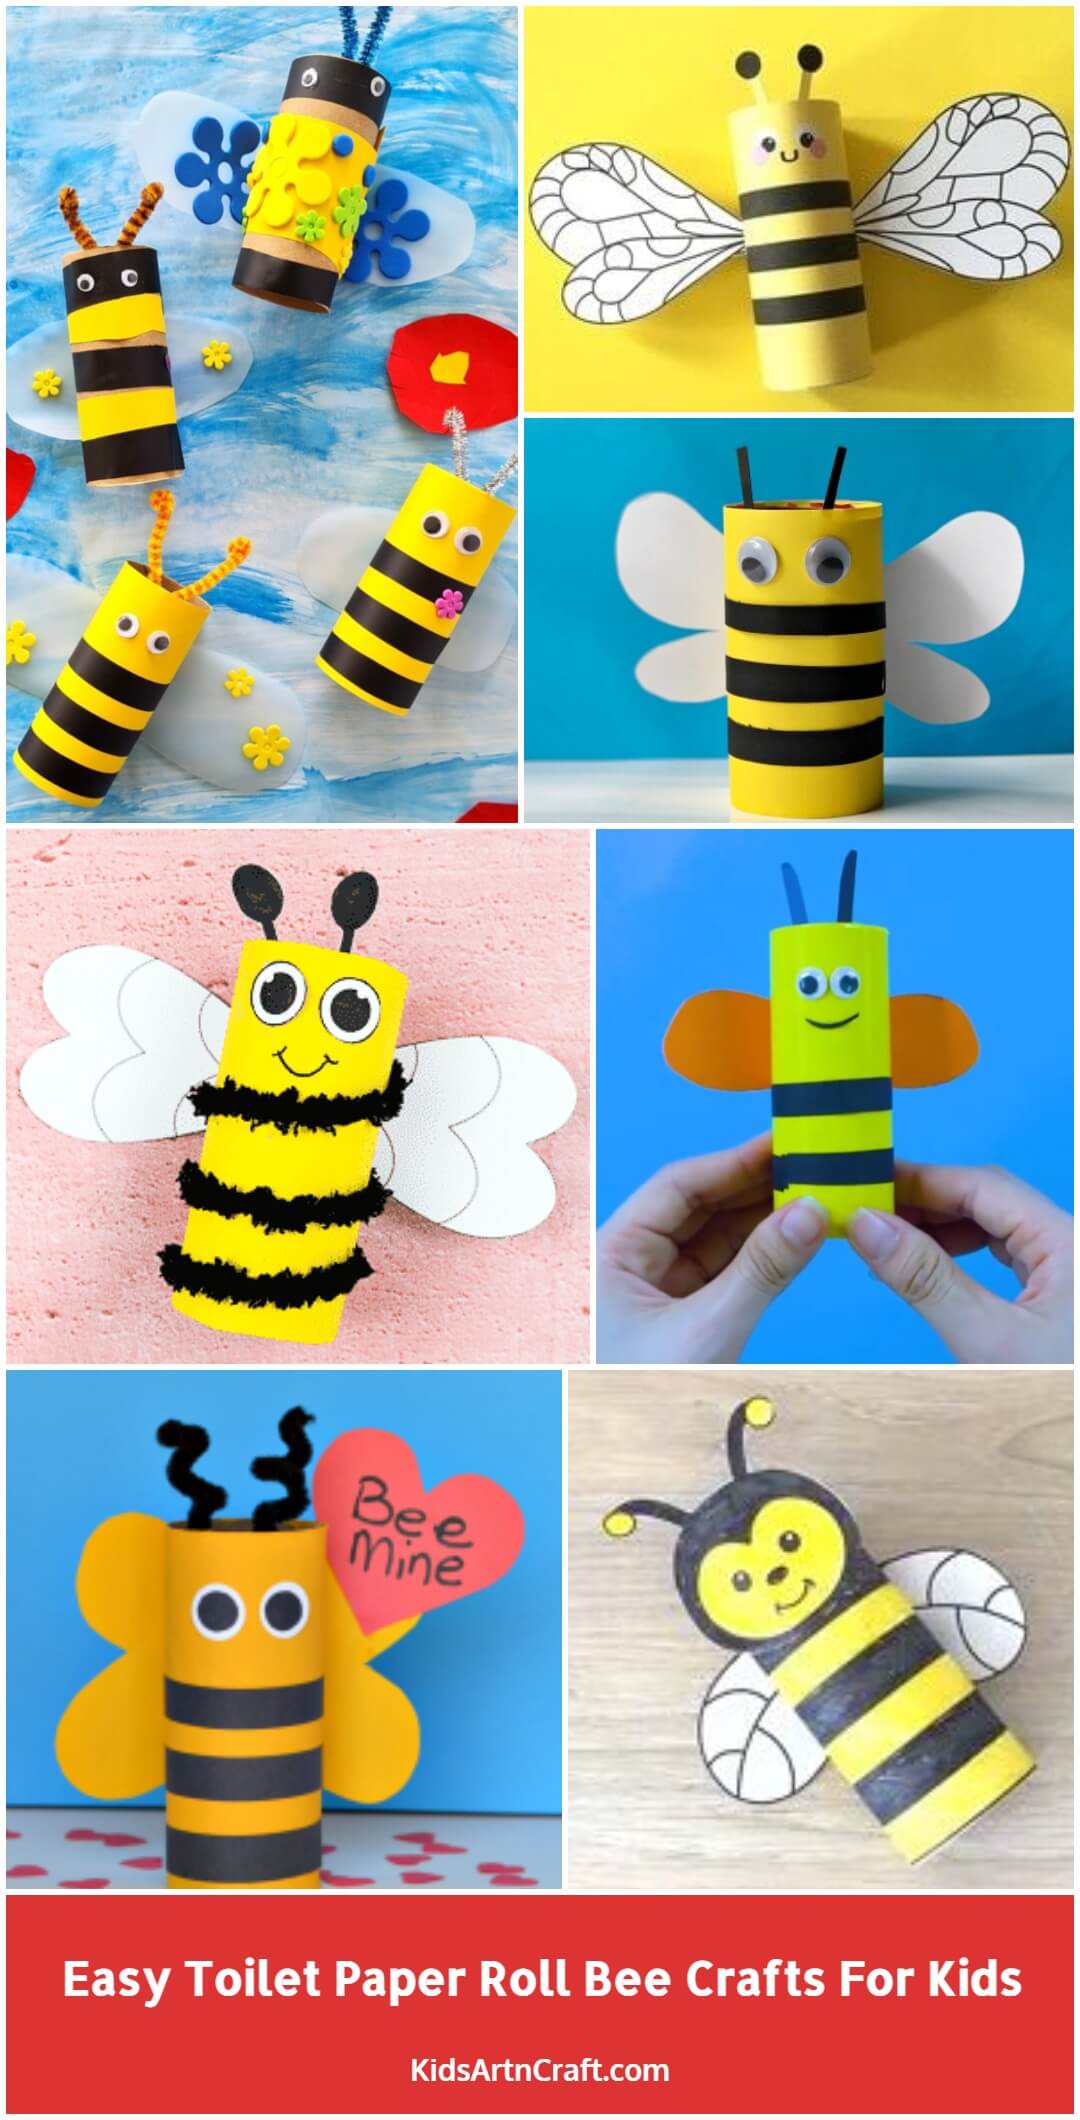 Easy Toilet Paper Roll Bee Crafts for Kids - Kids Art & Craft